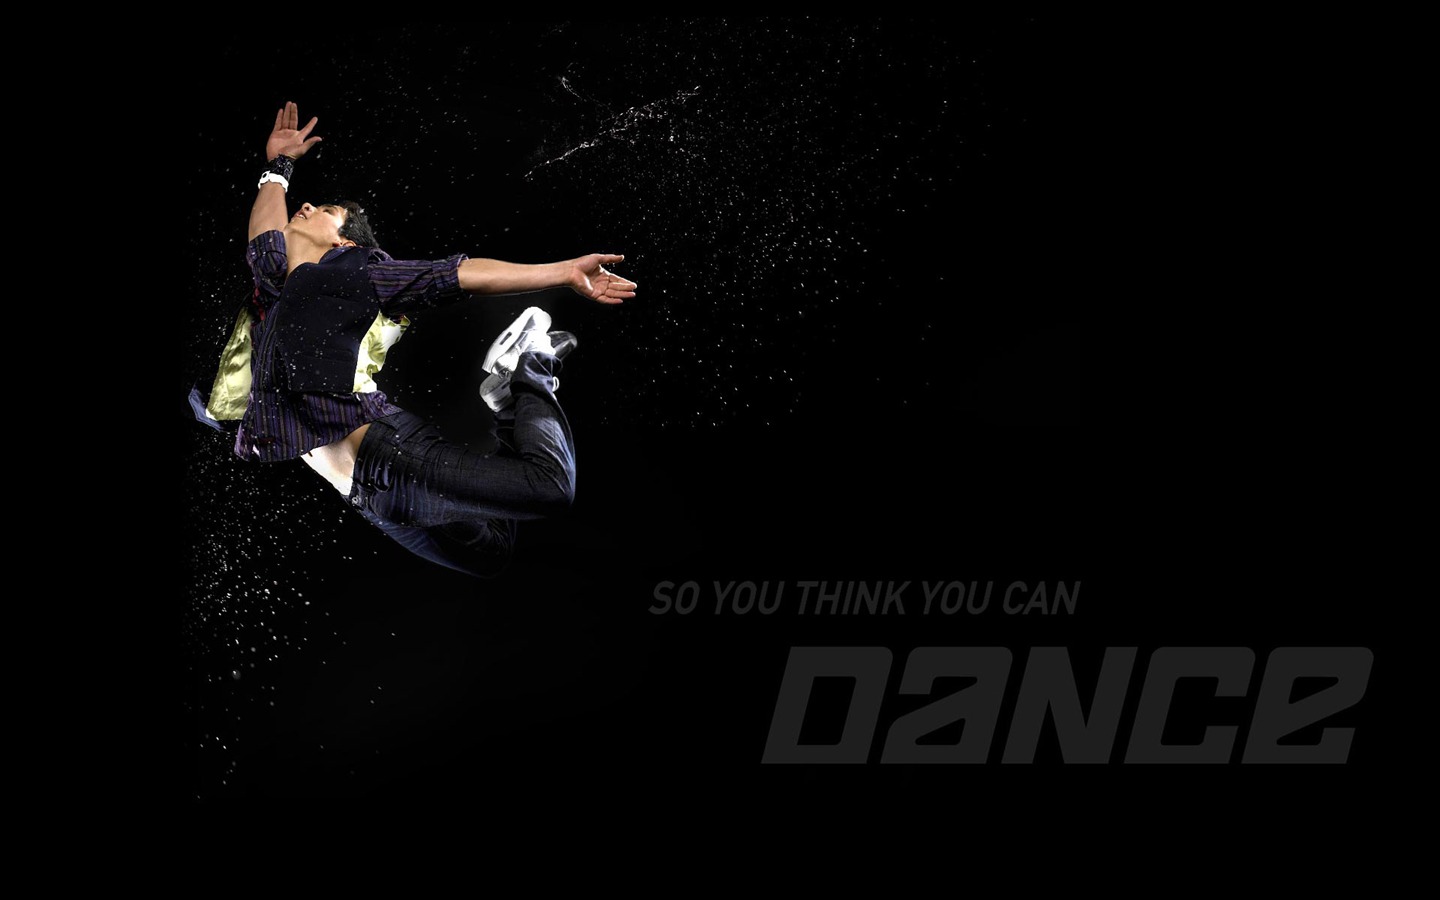 So You Think You Can Dance 舞林爭霸壁紙(一) #8 - 1440x900